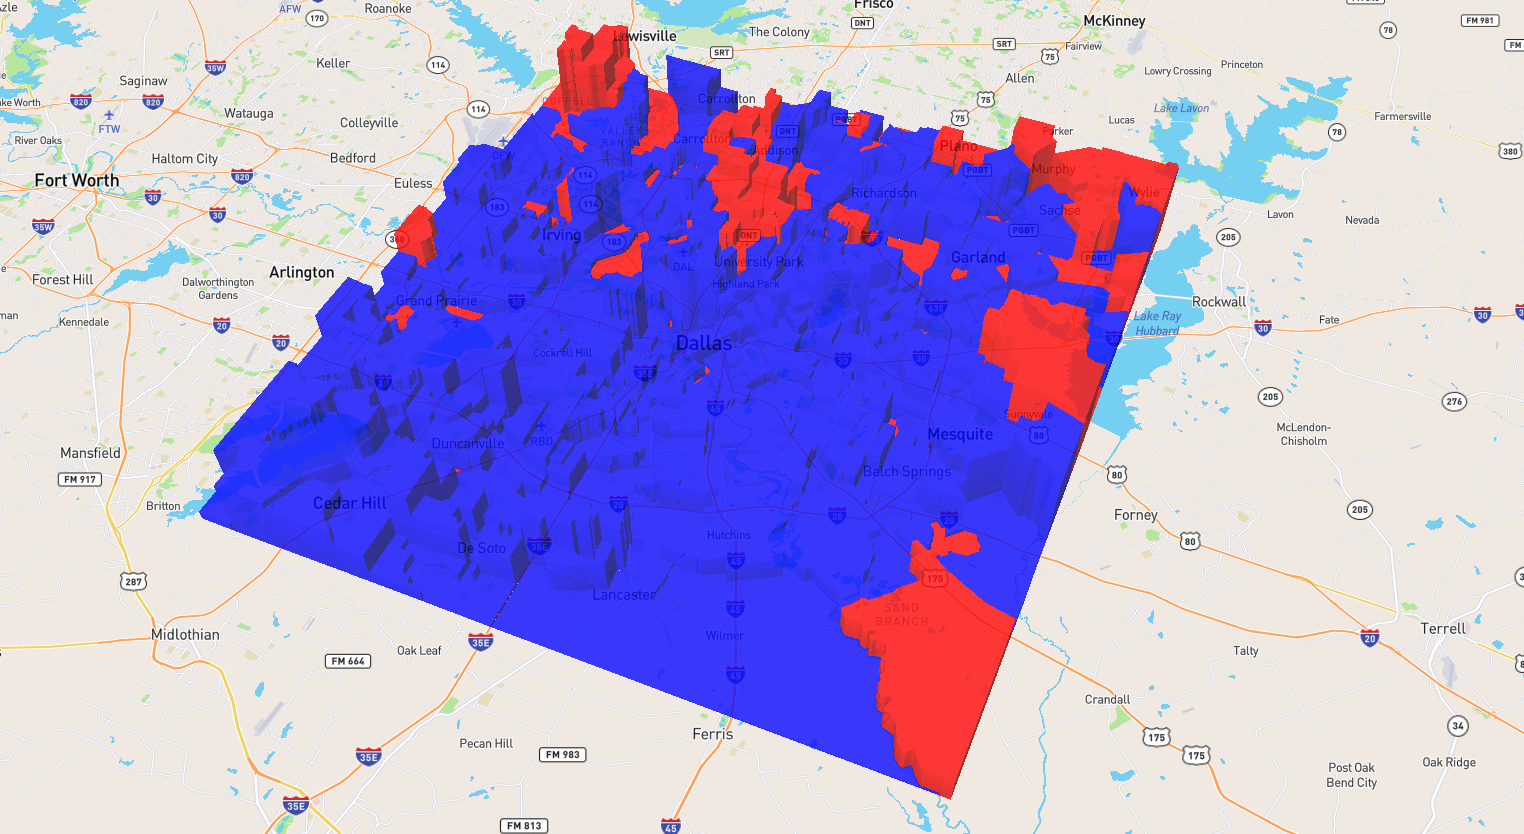 3d Election Result Maps for Dallas County by Robert Mundinger